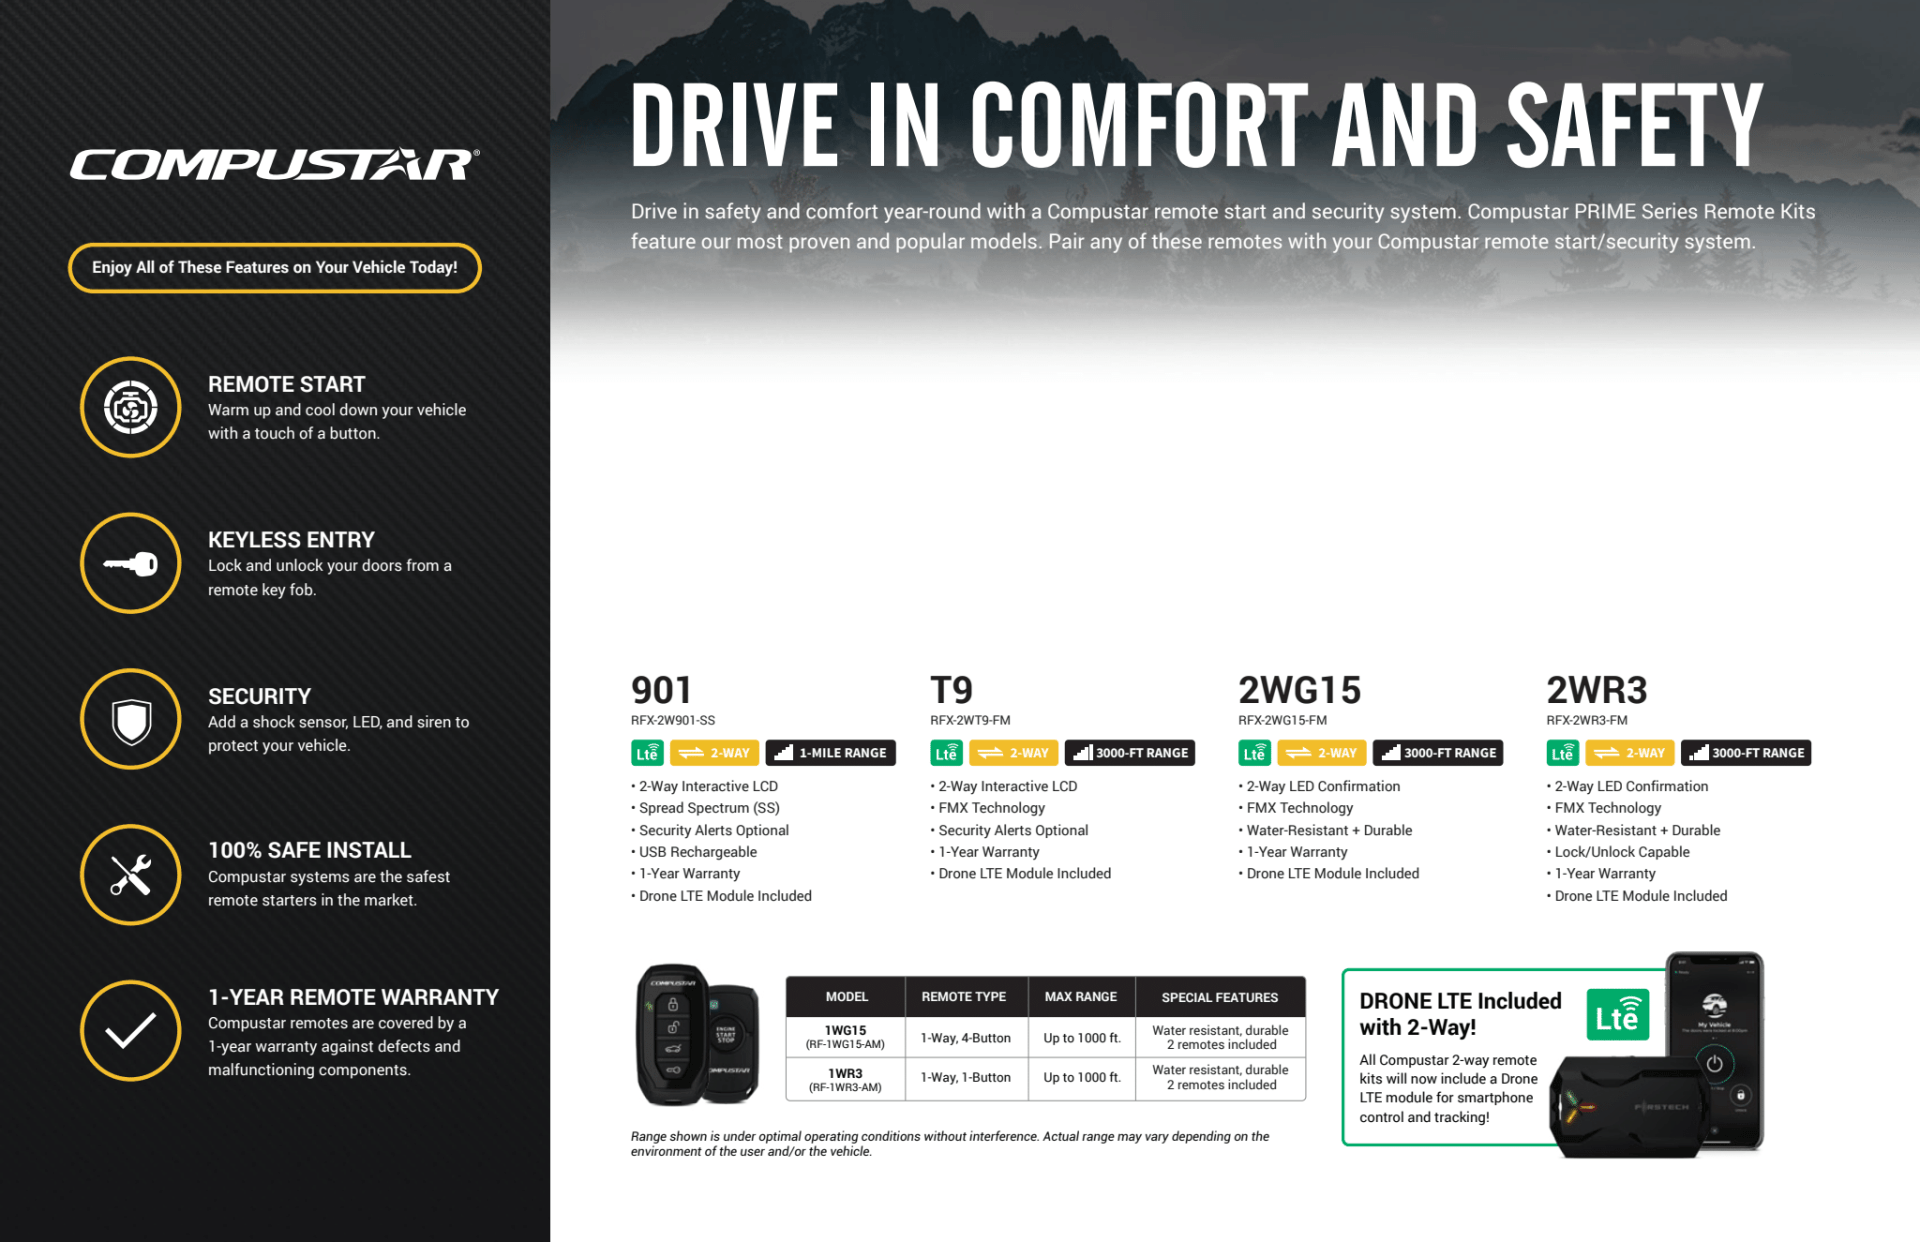 Drive with comfort and safety banner